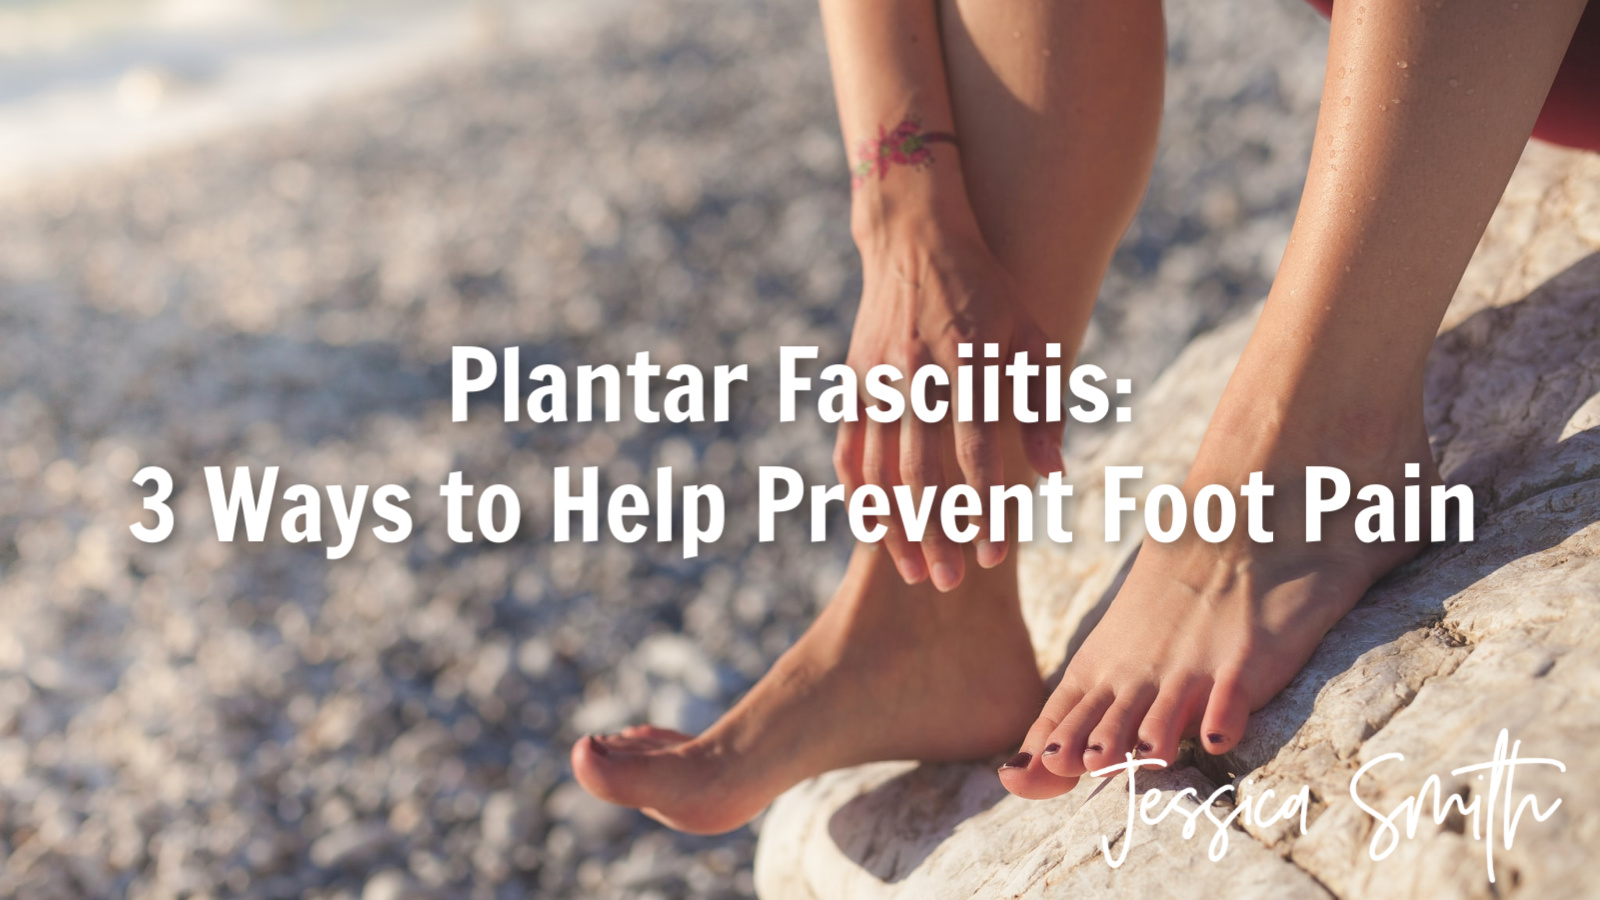 Plantar Fasciitis: 3 Ways to Prevent This Common Cause of Foot Pain